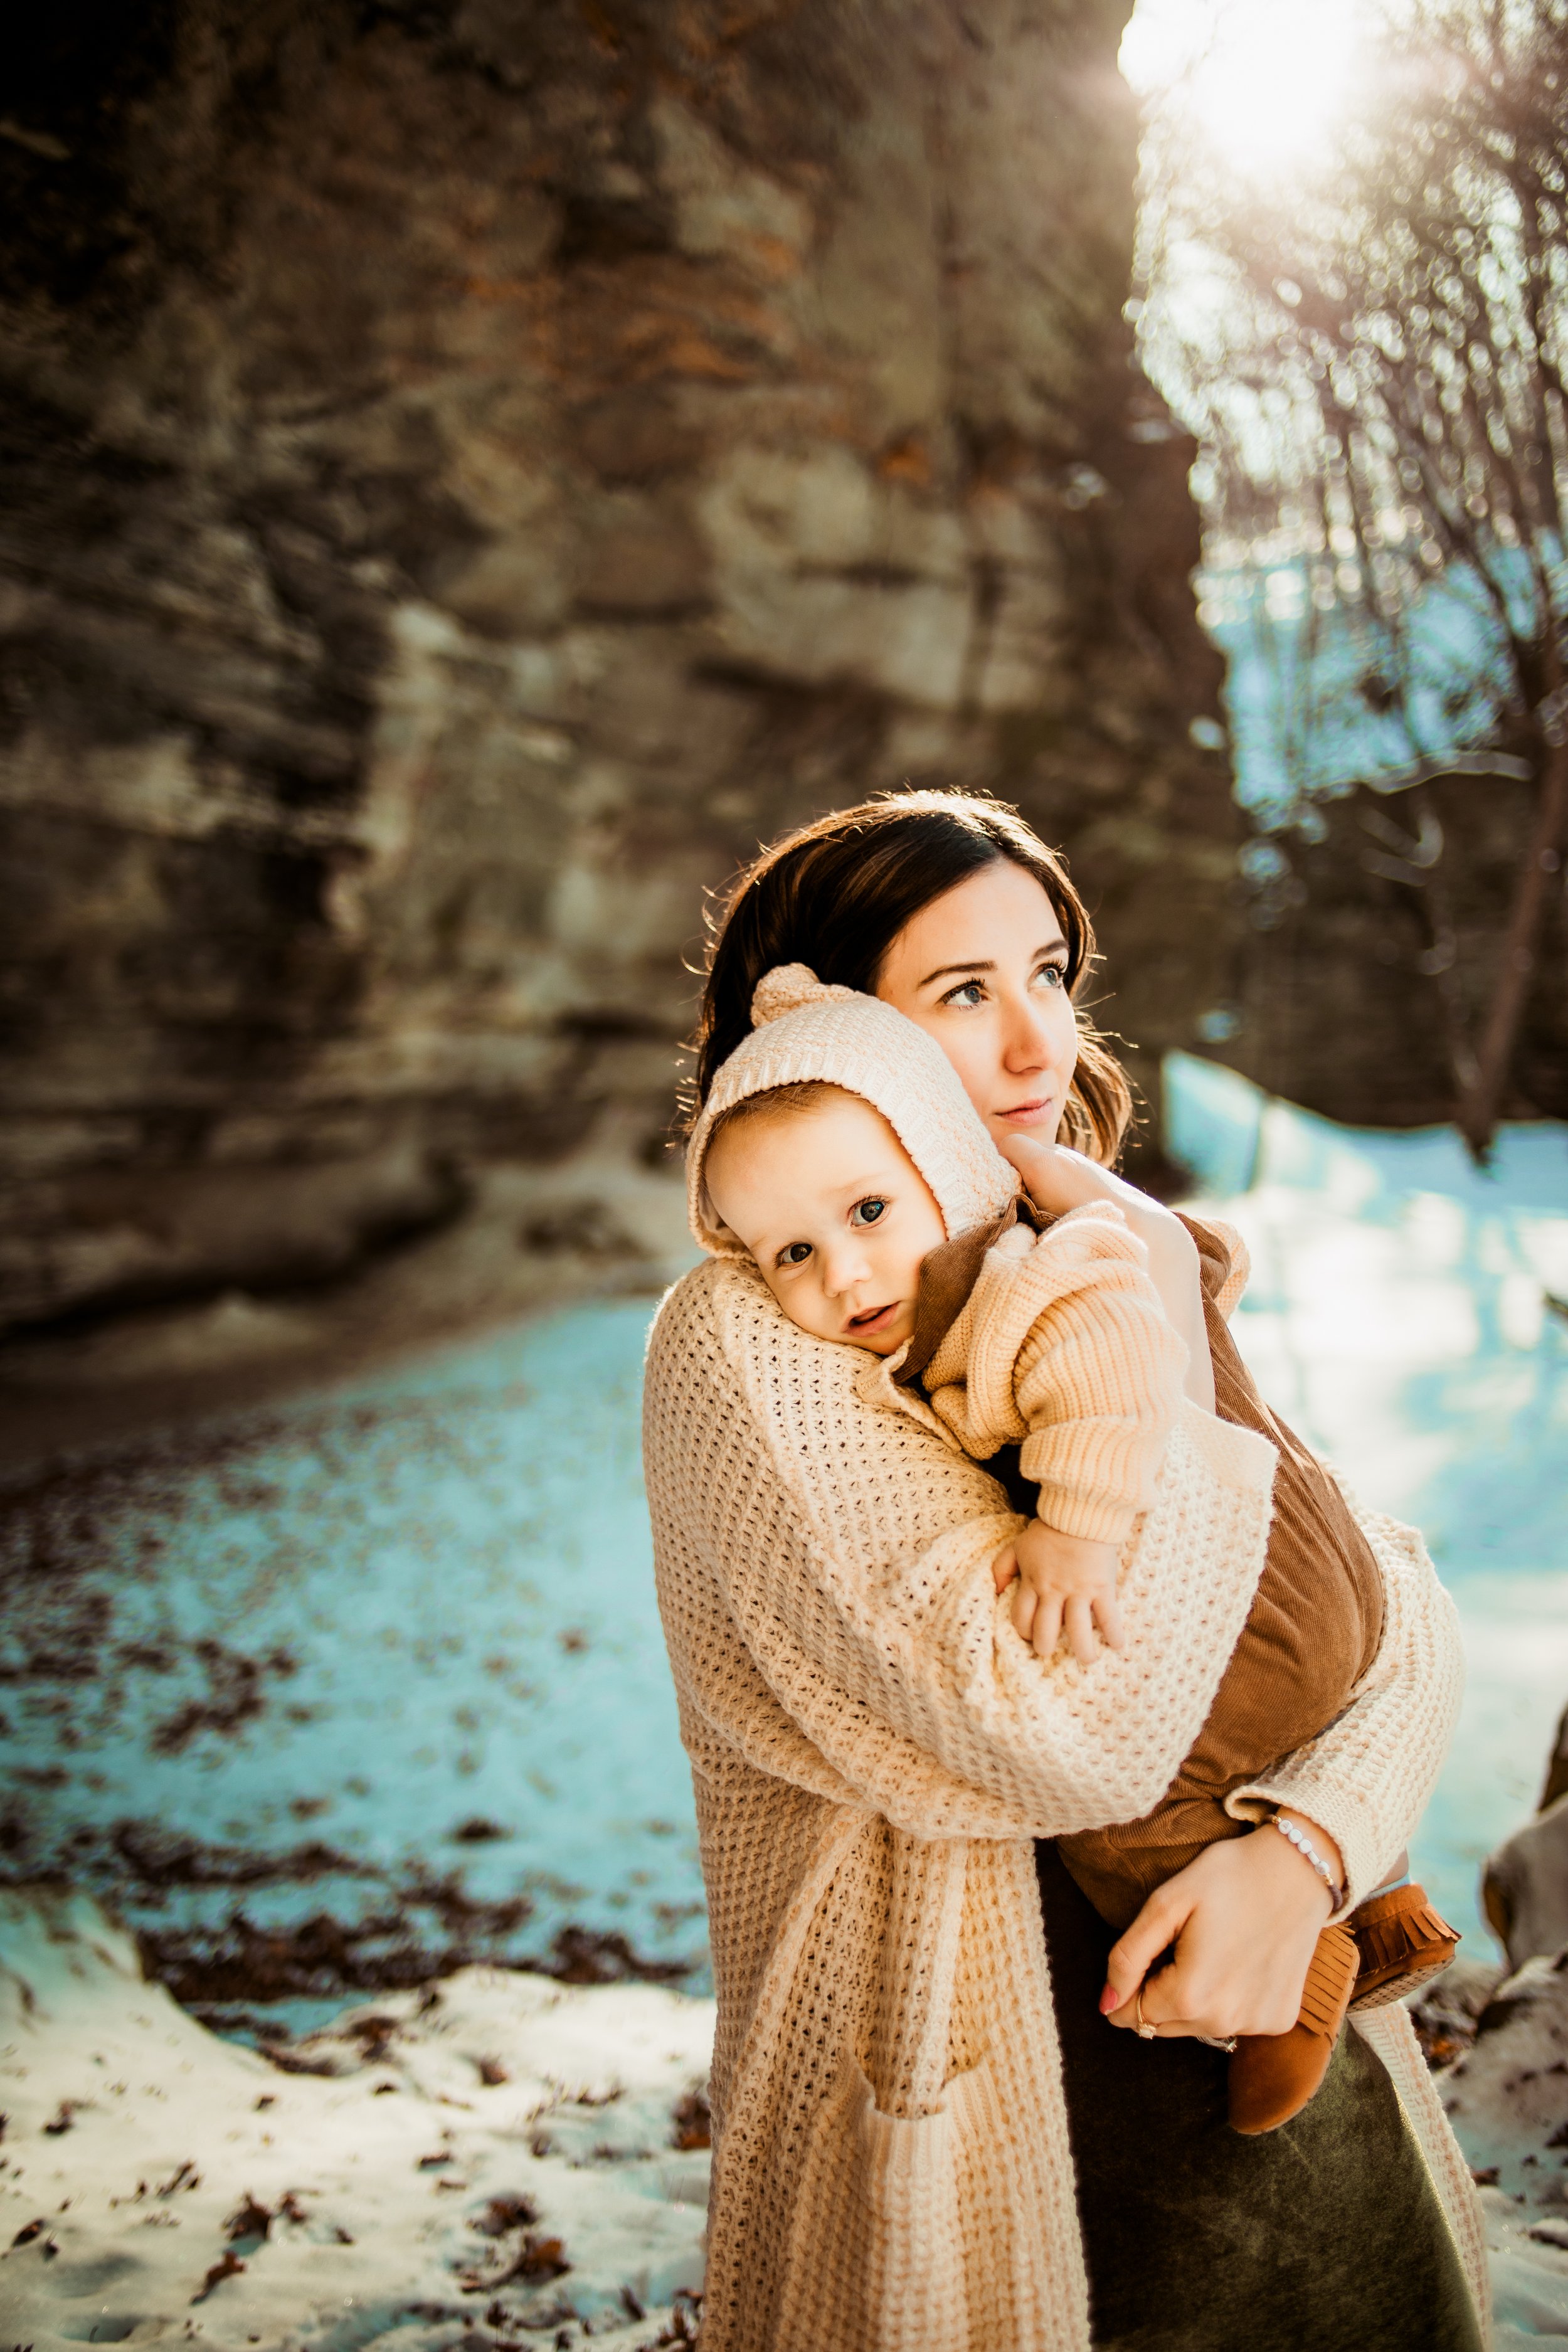  Teala Ward Photography captures a mother snuggling her baby girl in a bonnet at Starved Rock State Park. baby in bonnet mother's love #TealaWardPhotography #TealaWardNursing #StarvedRockStatePark #nursingbaby #breastfedbabyphotography #motherandbaby